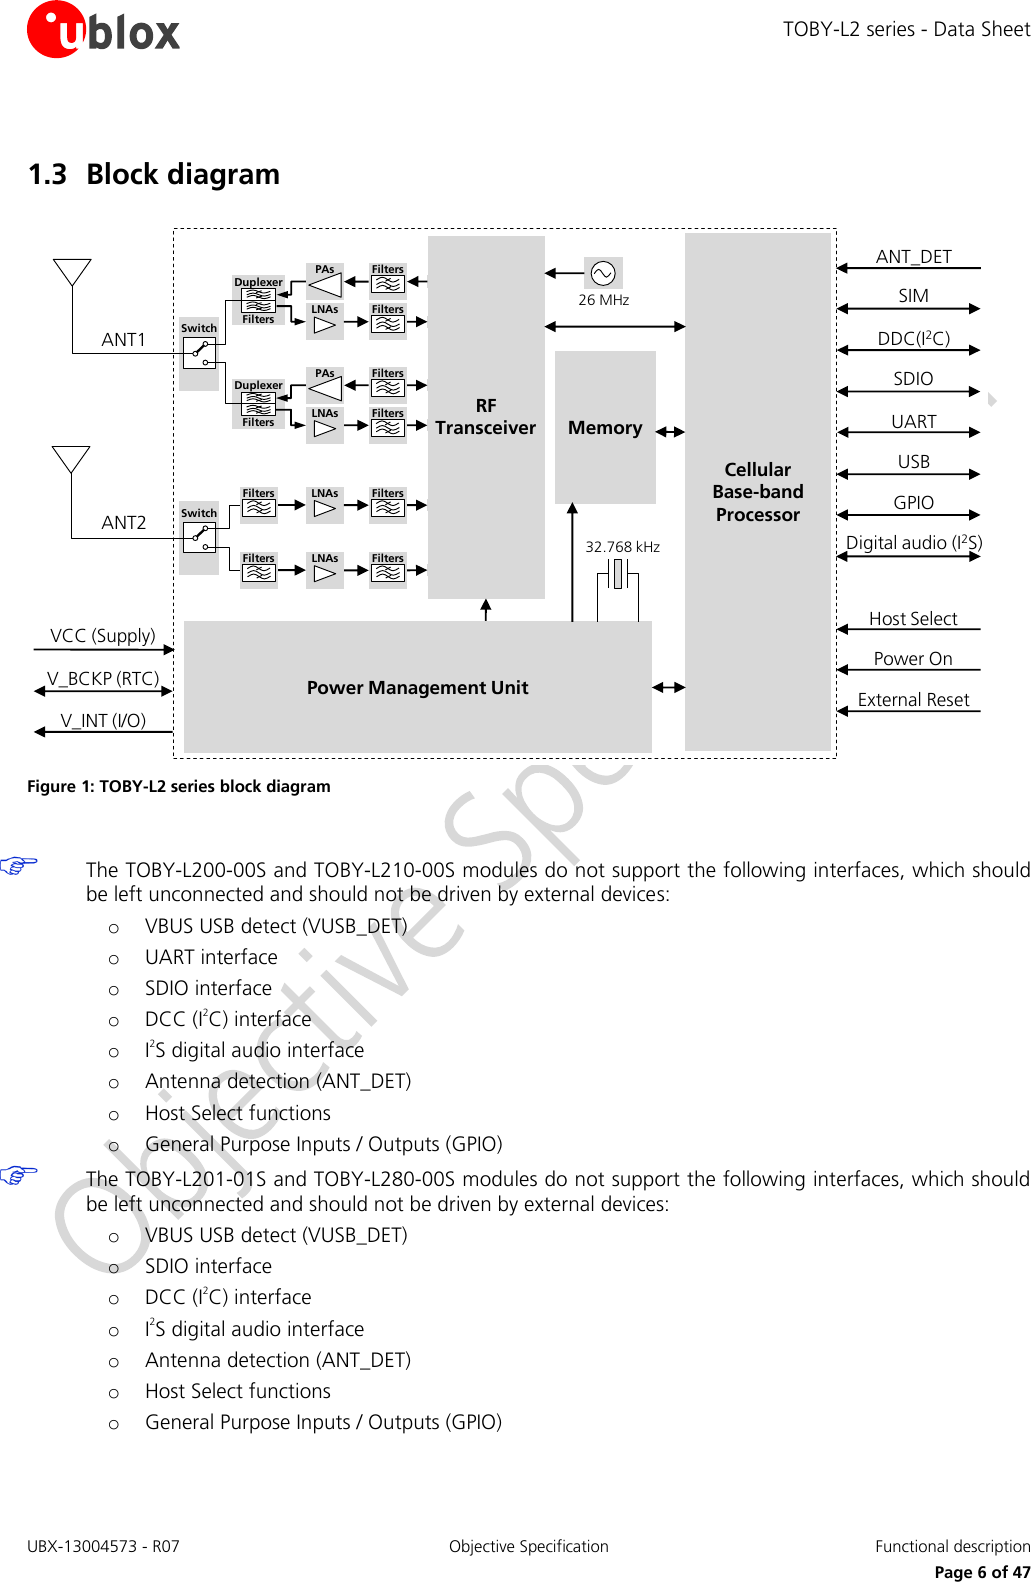 TOBY-L2 series - Data Sheet UBX-13004573 - R07  Objective Specification  Functional description   Page 6 of 47 1.3 Block diagram CellularBase-bandProcessorMemoryPower Management Unit26 MHz32.768 kHzANT1RF TransceiverANT2V_INT (I/O)V_BCKP (RTC)VCC (Supply)SIMUSBGPIOPower OnExternal ResetPAsLNAs FiltersFiltersDuplexerFiltersPAsLNAs FiltersFiltersDuplexerFiltersLNAs FiltersFiltersLNAs FiltersFiltersSwitchSwitchDDC(I2C)SDIOUARTDigital audio (I2S)ANT_DETHost Select Figure 1: TOBY-L2 series block diagram   The TOBY-L200-00S and TOBY-L210-00S modules do not support the following interfaces, which should be left unconnected and should not be driven by external devices: o VBUS USB detect (VUSB_DET)  o UART interface  o SDIO interface  o DCC (I2C) interface  o I2S digital audio interface  o Antenna detection (ANT_DET)  o Host Select functions  o General Purpose Inputs / Outputs (GPIO)  The TOBY-L201-01S and TOBY-L280-00S modules do not support the following interfaces, which should be left unconnected and should not be driven by external devices: o VBUS USB detect (VUSB_DET)  o SDIO interface  o DCC (I2C) interface  o I2S digital audio interface  o Antenna detection (ANT_DET)  o Host Select functions  o General Purpose Inputs / Outputs (GPIO)  